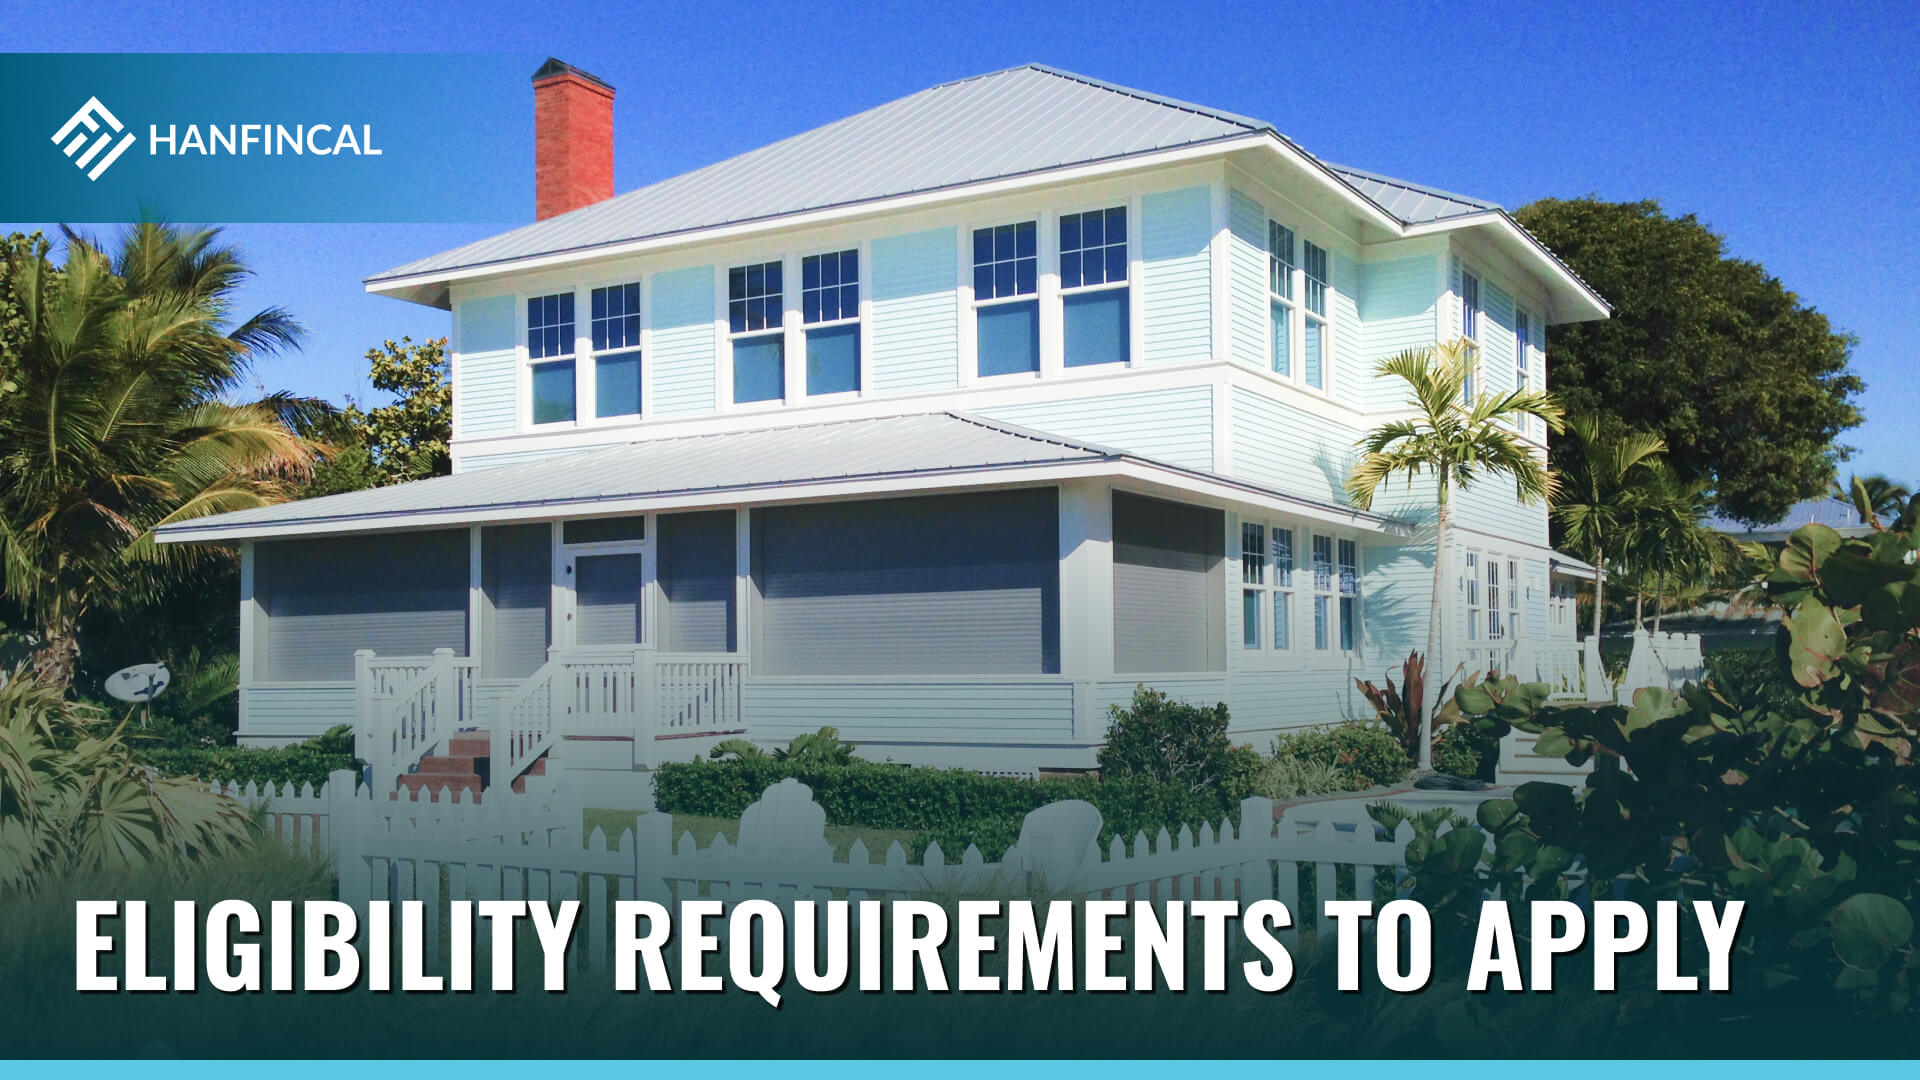 Eligibility requirements to apply for Section 8 housing in Florida